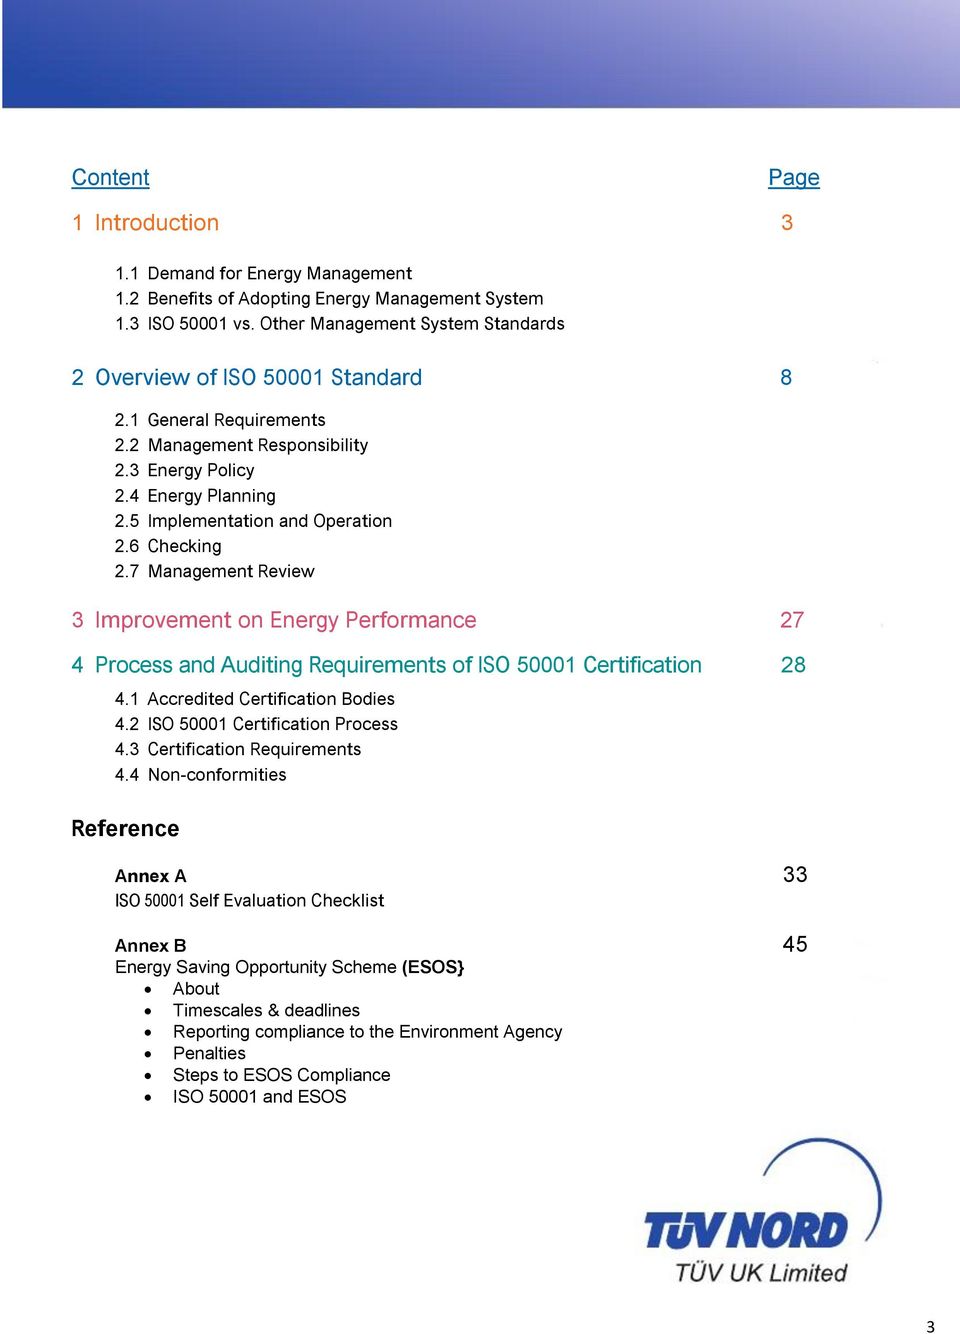 6 Checking 2.7 Management Review 3 Improvement on Energy Performance 27 4 Process and Auditing Requirements of ISO 50001 Certification 28 4.1 Accredited Certification Bodies 4.